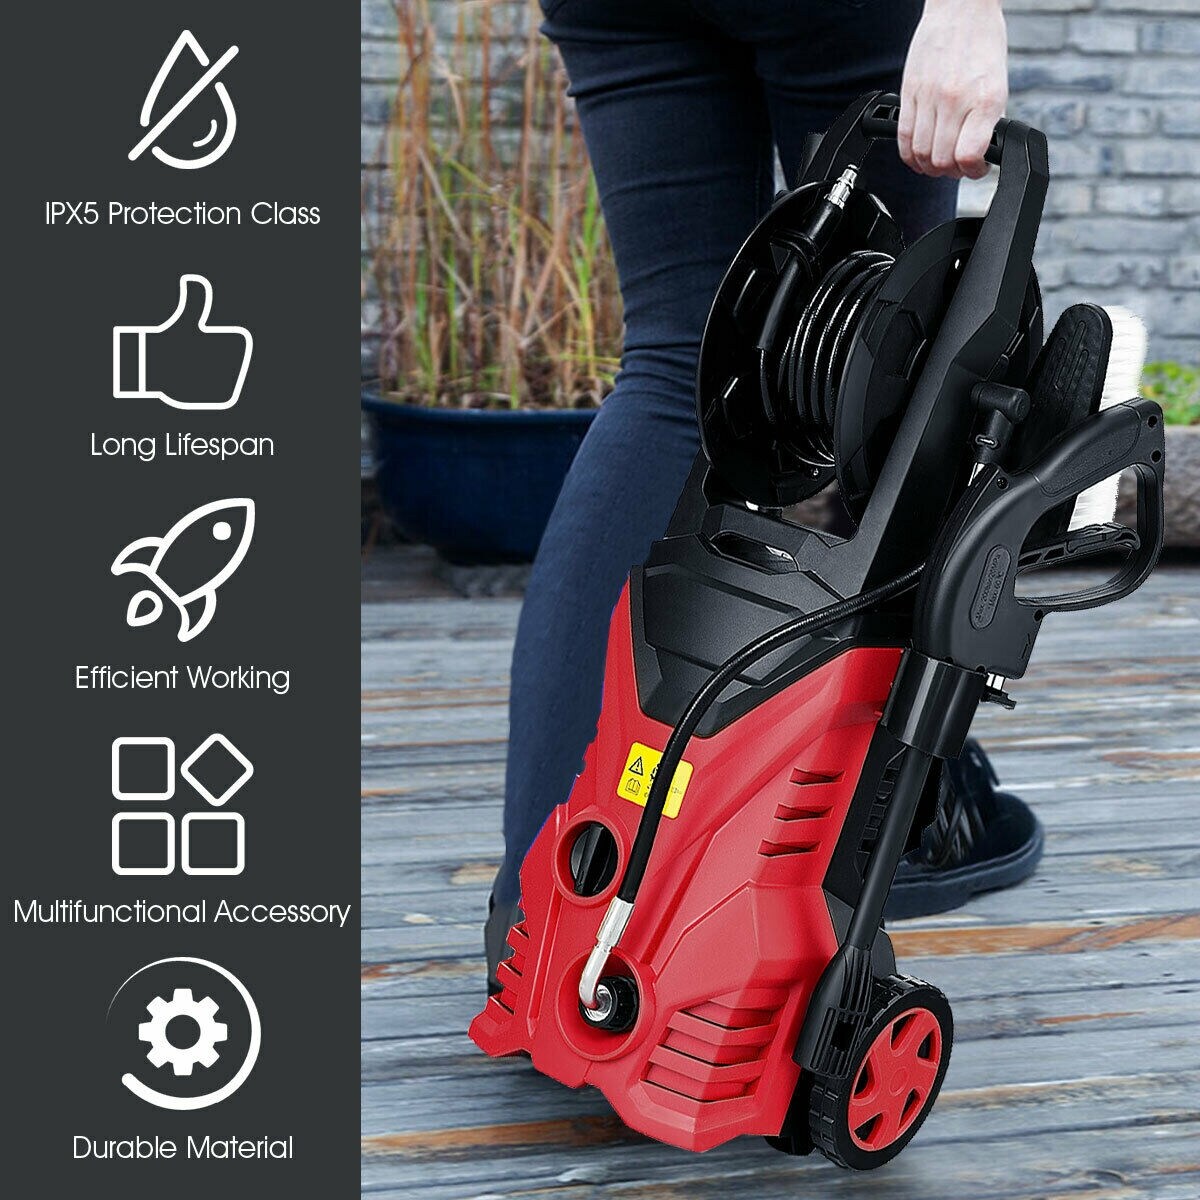 1800W 2030PSI Electric Pressure Washer Cleaner with Hose Reel